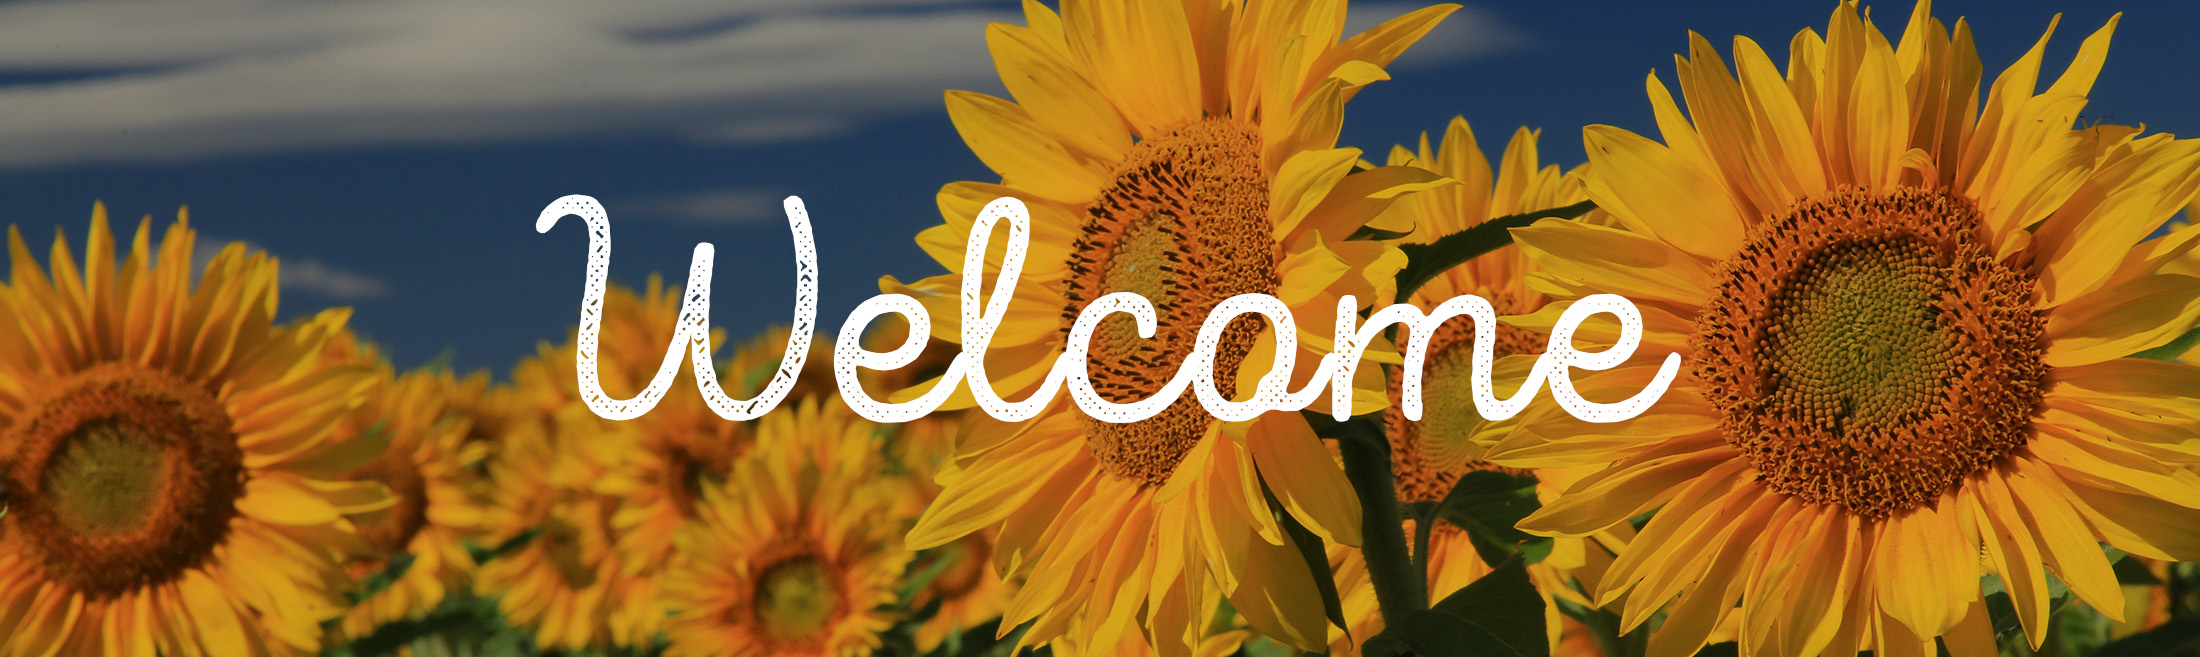 Welcome summer sunflowers